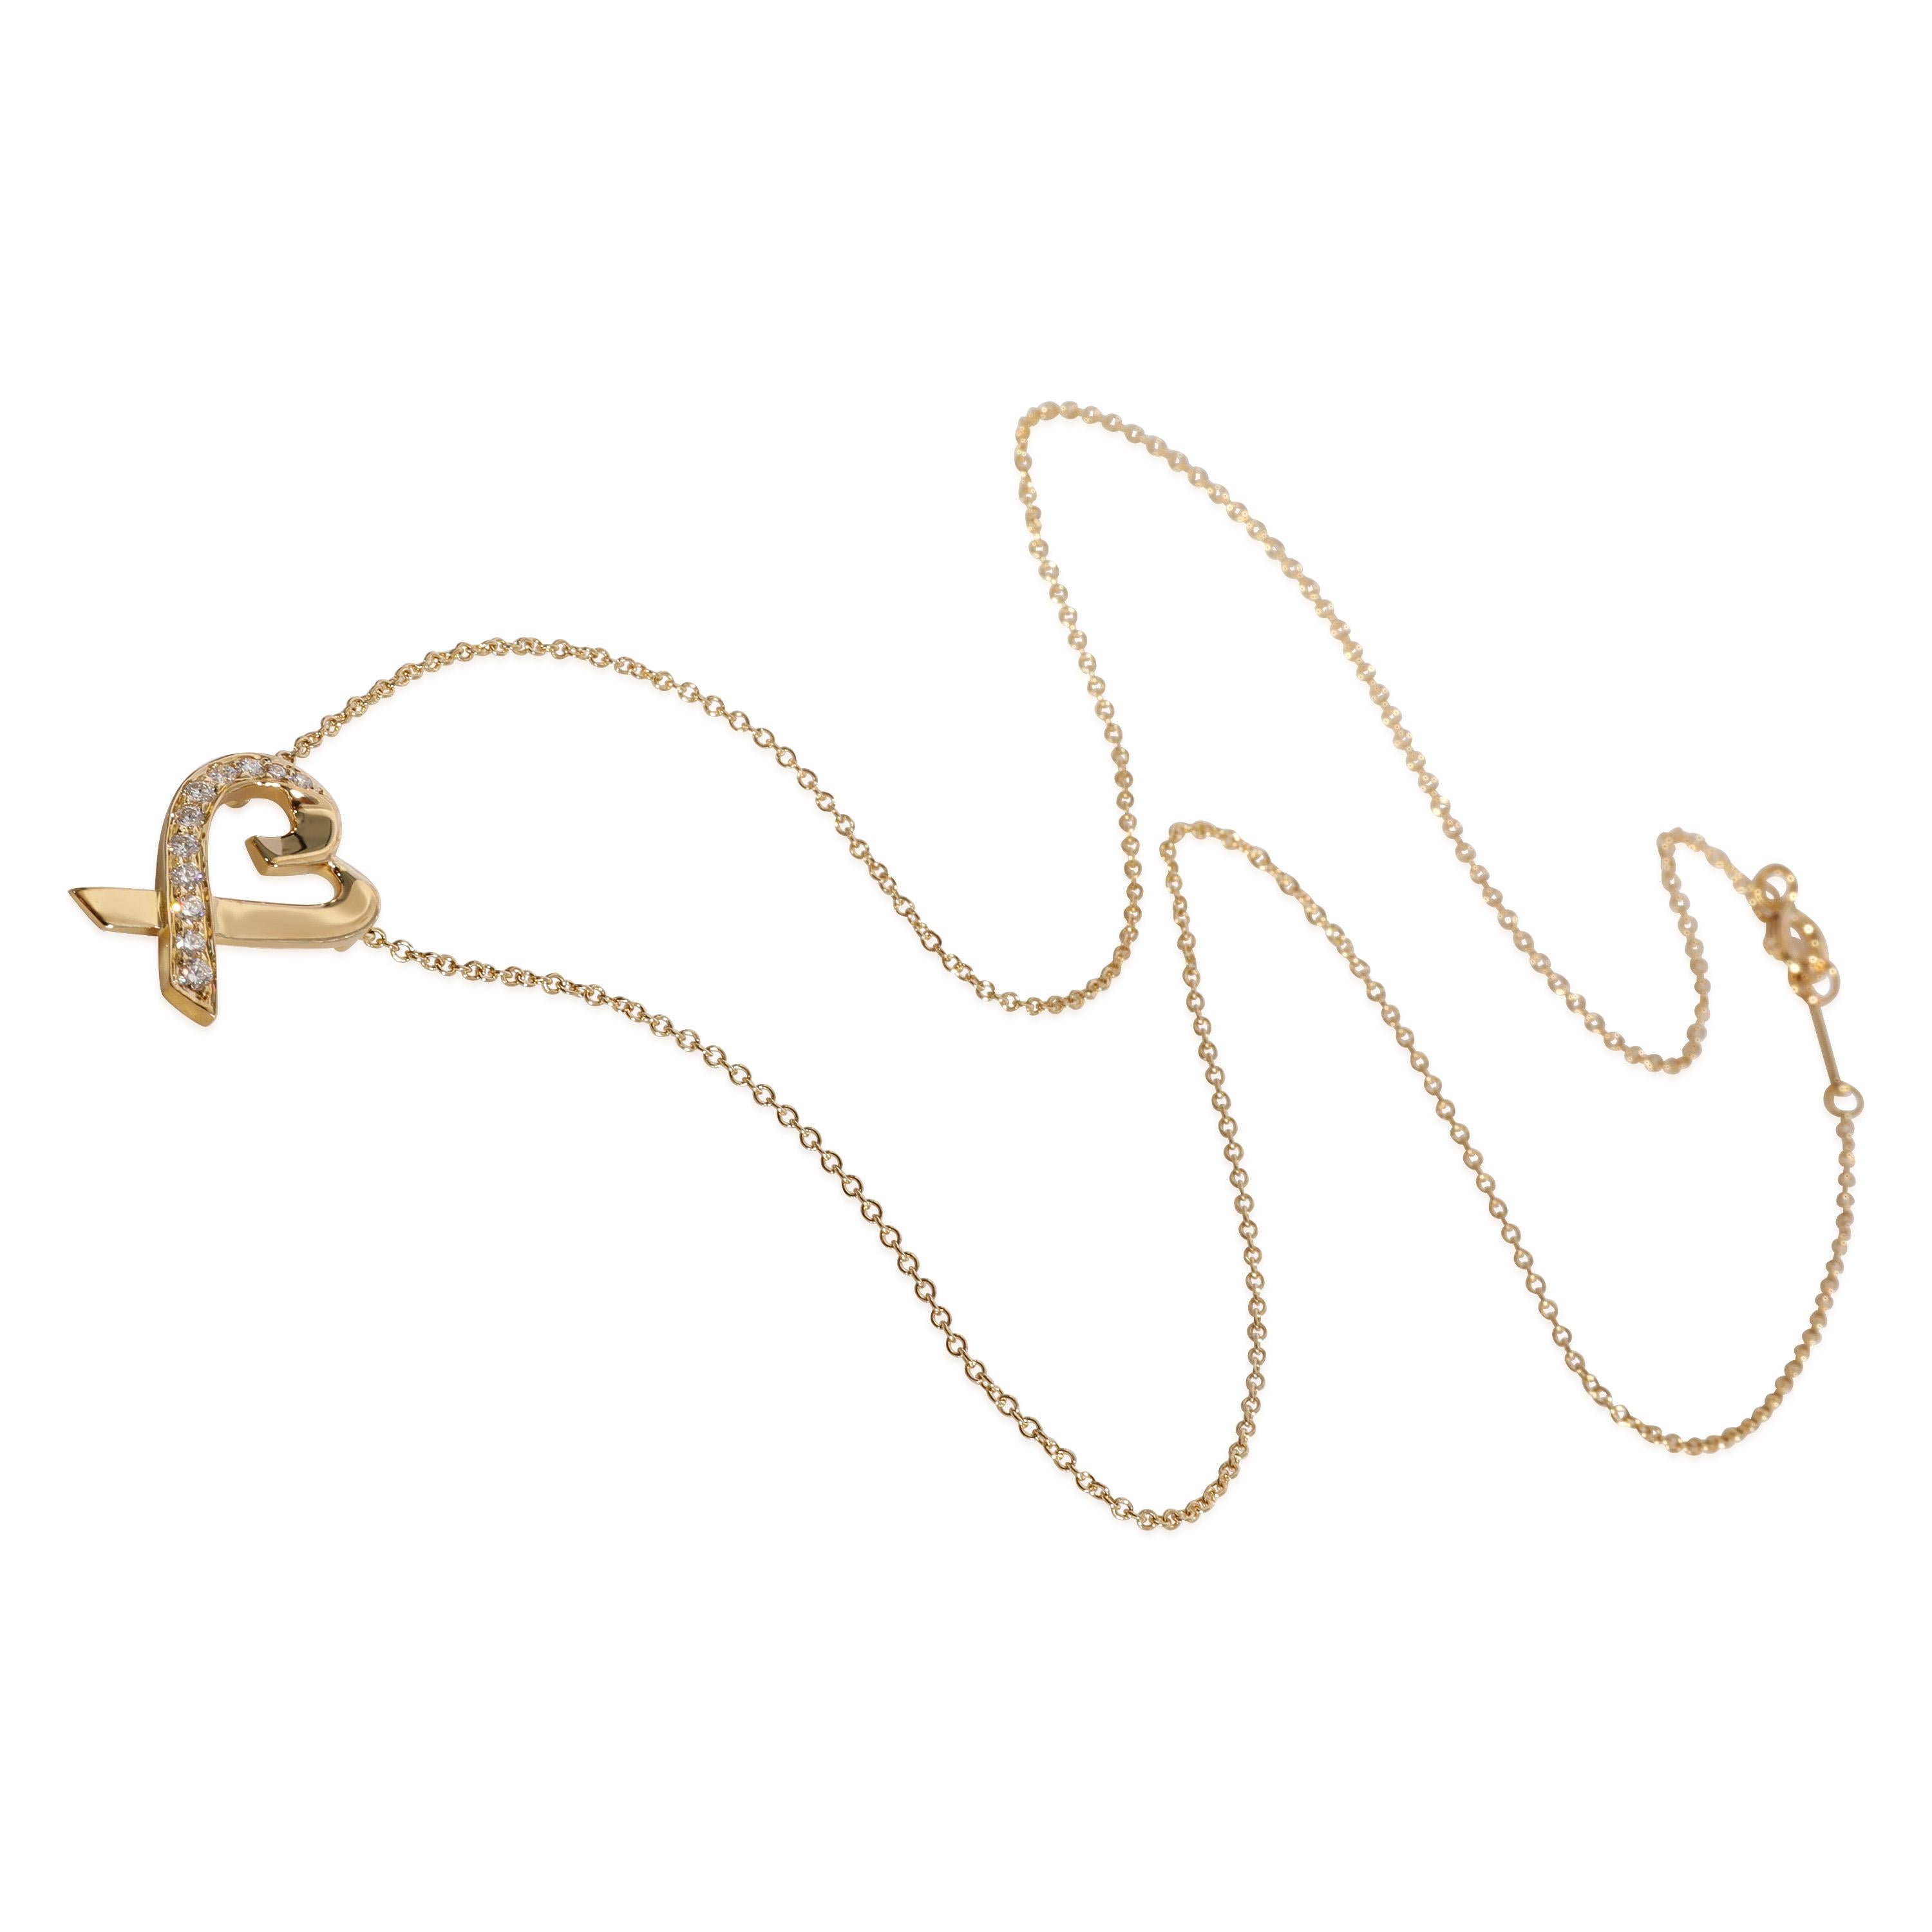 Tiffany & Co. Paloma Picasso Loving Heart Pendant in 18K Yellow Gold 0.14 CTW

PRIMARY DETAILS
SKU: 124511
Listing Title: Tiffany & Co. Paloma Picasso Loving Heart Pendant in 18K Yellow Gold 0.14 CTW
Condition Description: Retails for 1900 USD. In